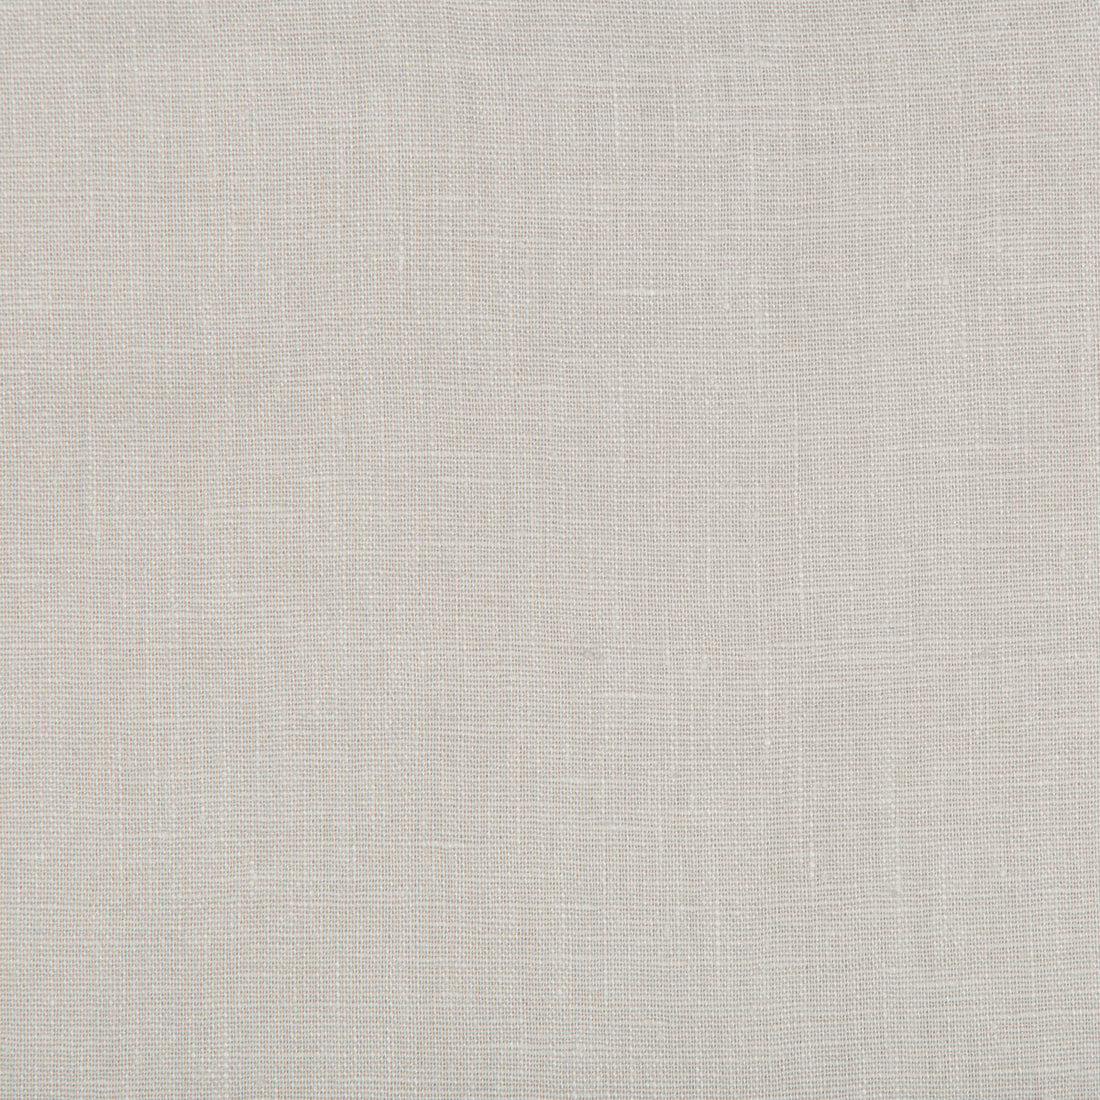 Kravet Basics fabric in 32344-2111 color - pattern 32344.2111.0 - by Kravet Basics in the Perfect Plains collection